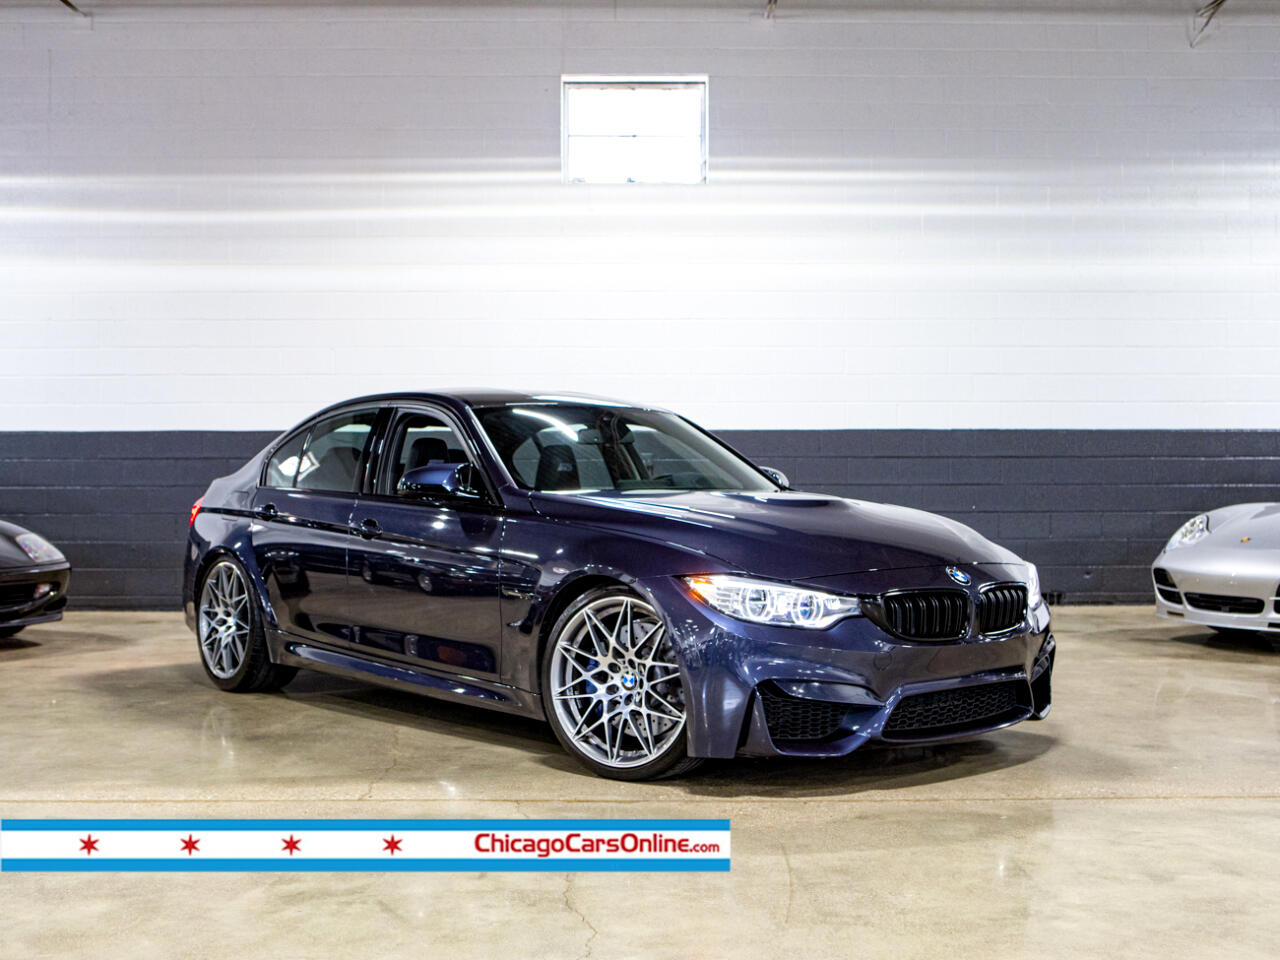 Used 2017 Bmw M3 Jahre 30 Competition For Sale In Addison Il 60101 Chicago Cars Online